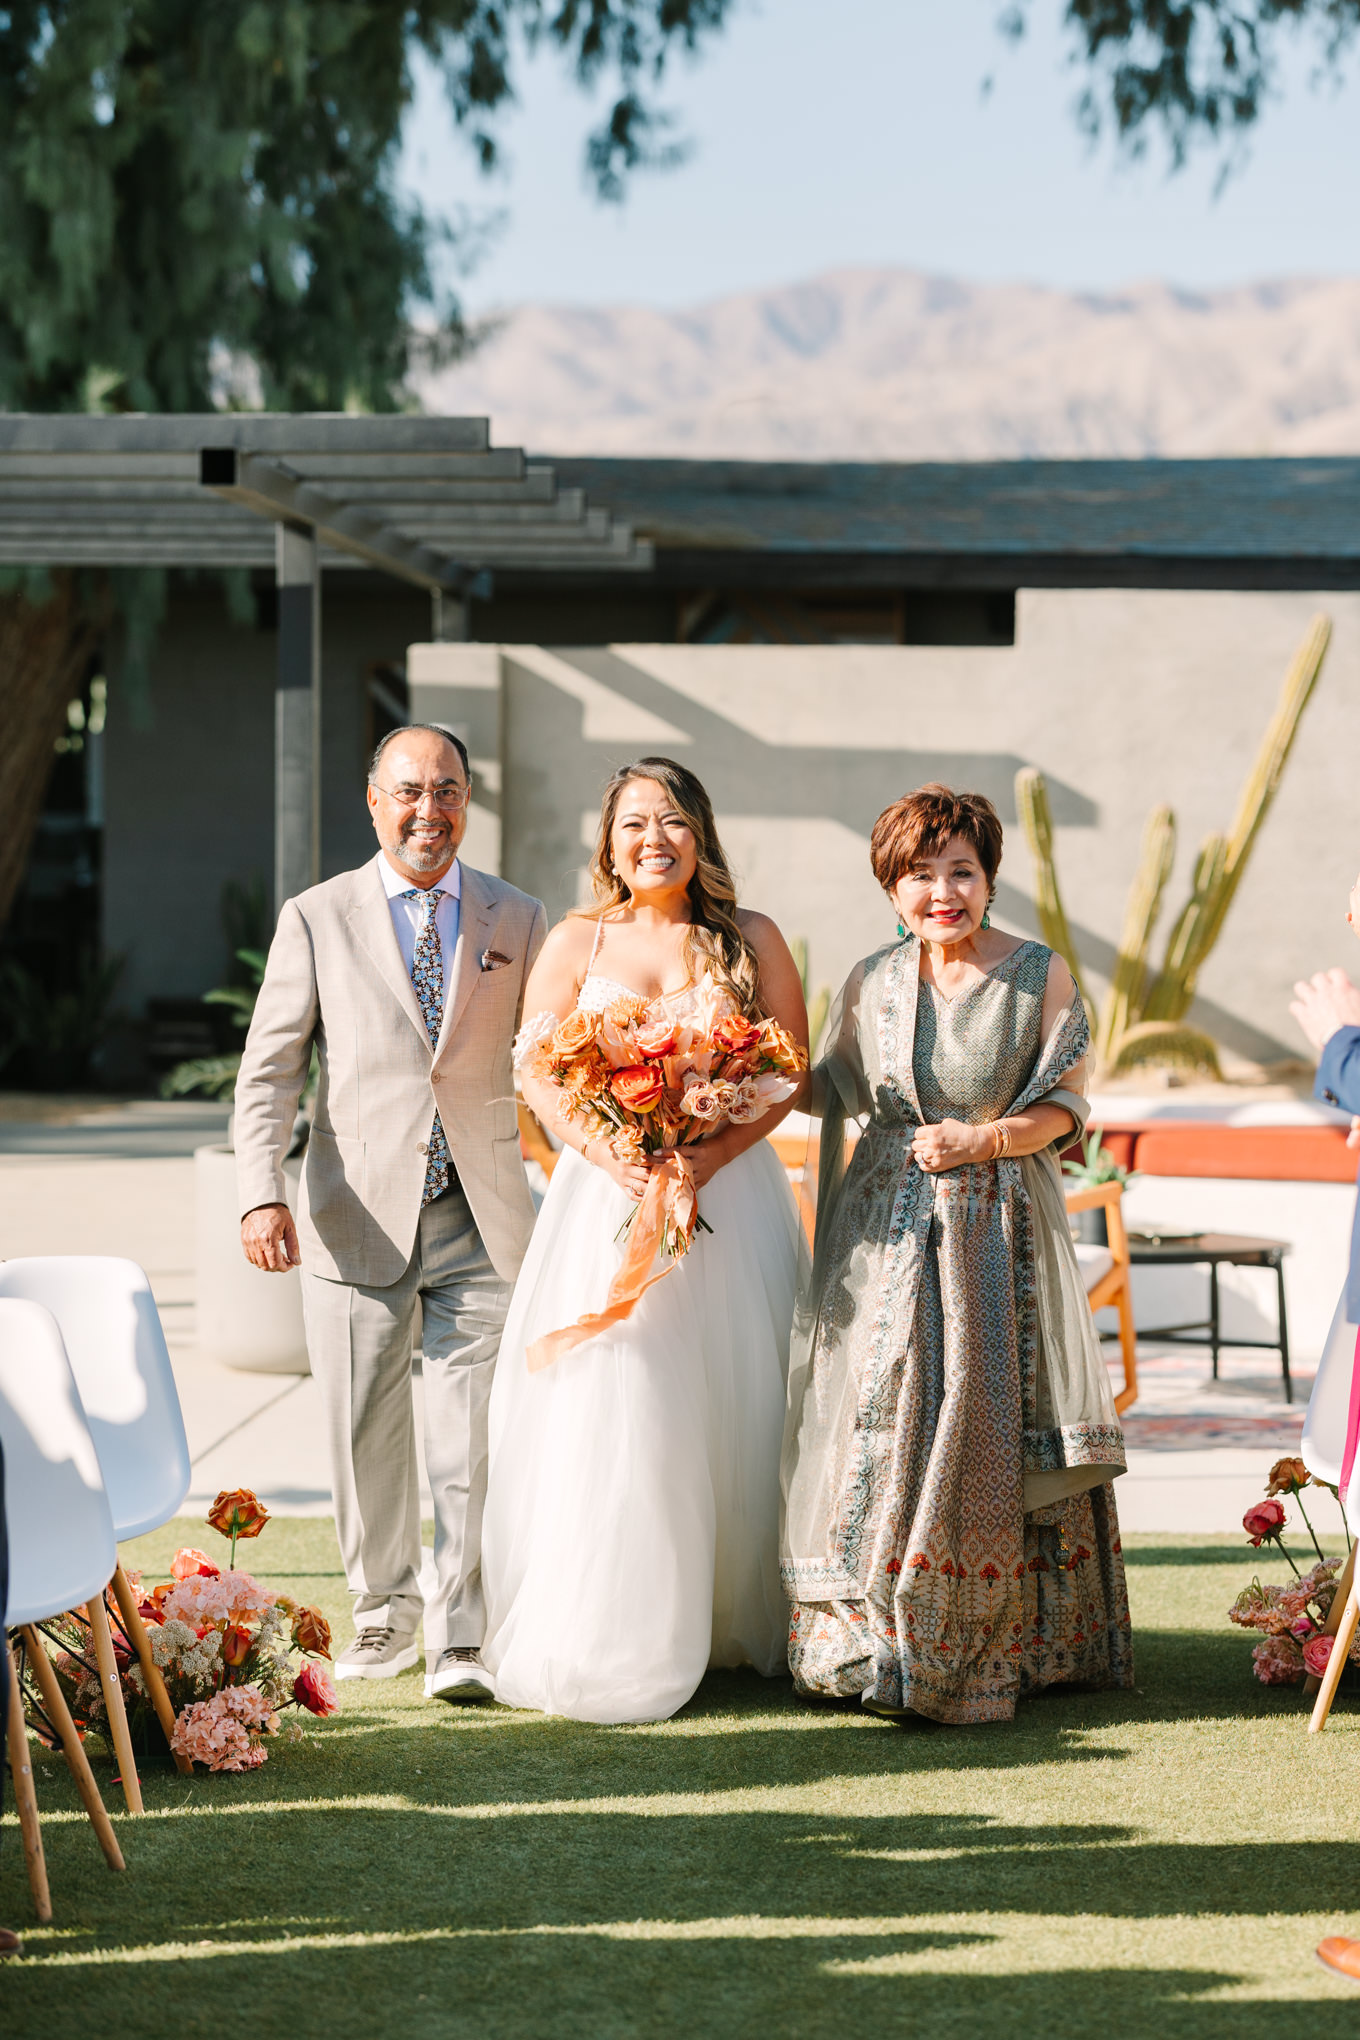 Bride walking with parents down the aisle | Pink and orange Lautner Compound wedding | Colorful Palm Springs wedding photography | #palmspringsphotographer #palmspringswedding #lautnercompound #southerncaliforniawedding  Source: Mary Costa Photography | Los Angeles